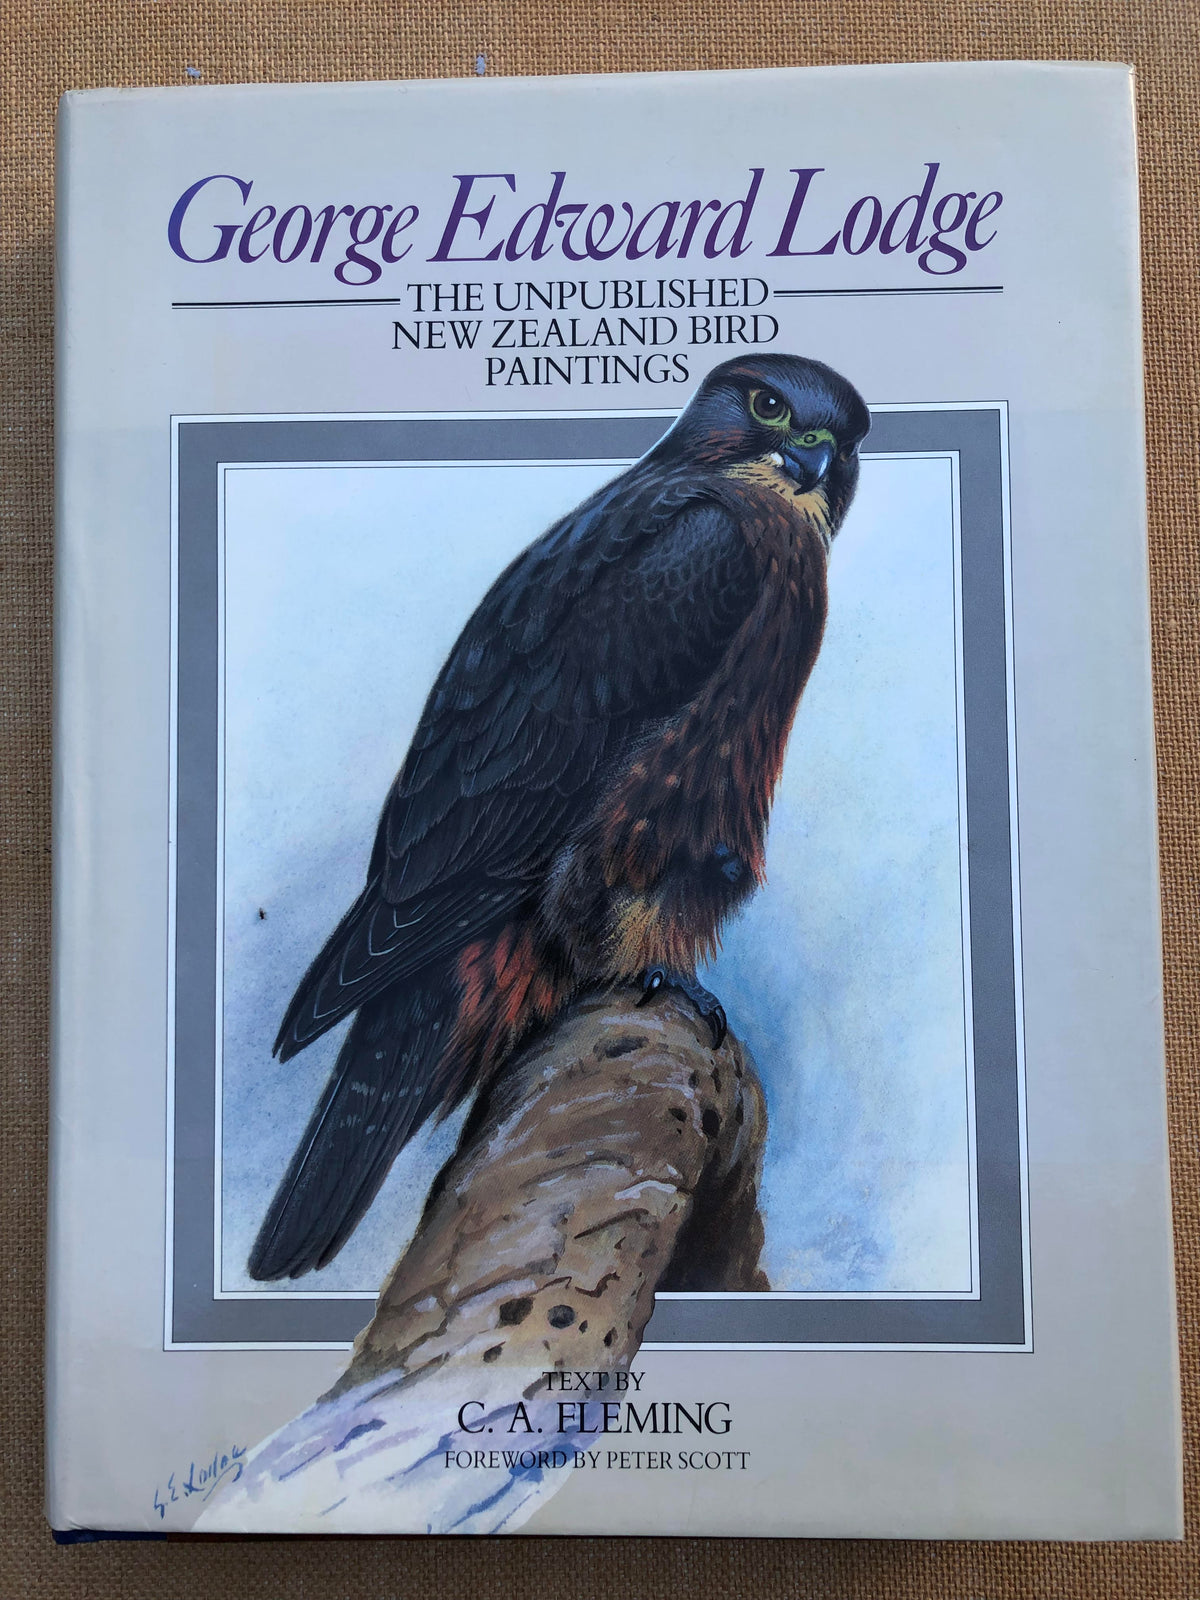 George Edward Lodge: The Unpublished New Zealand Bird Paintings - Text by CA Fleming